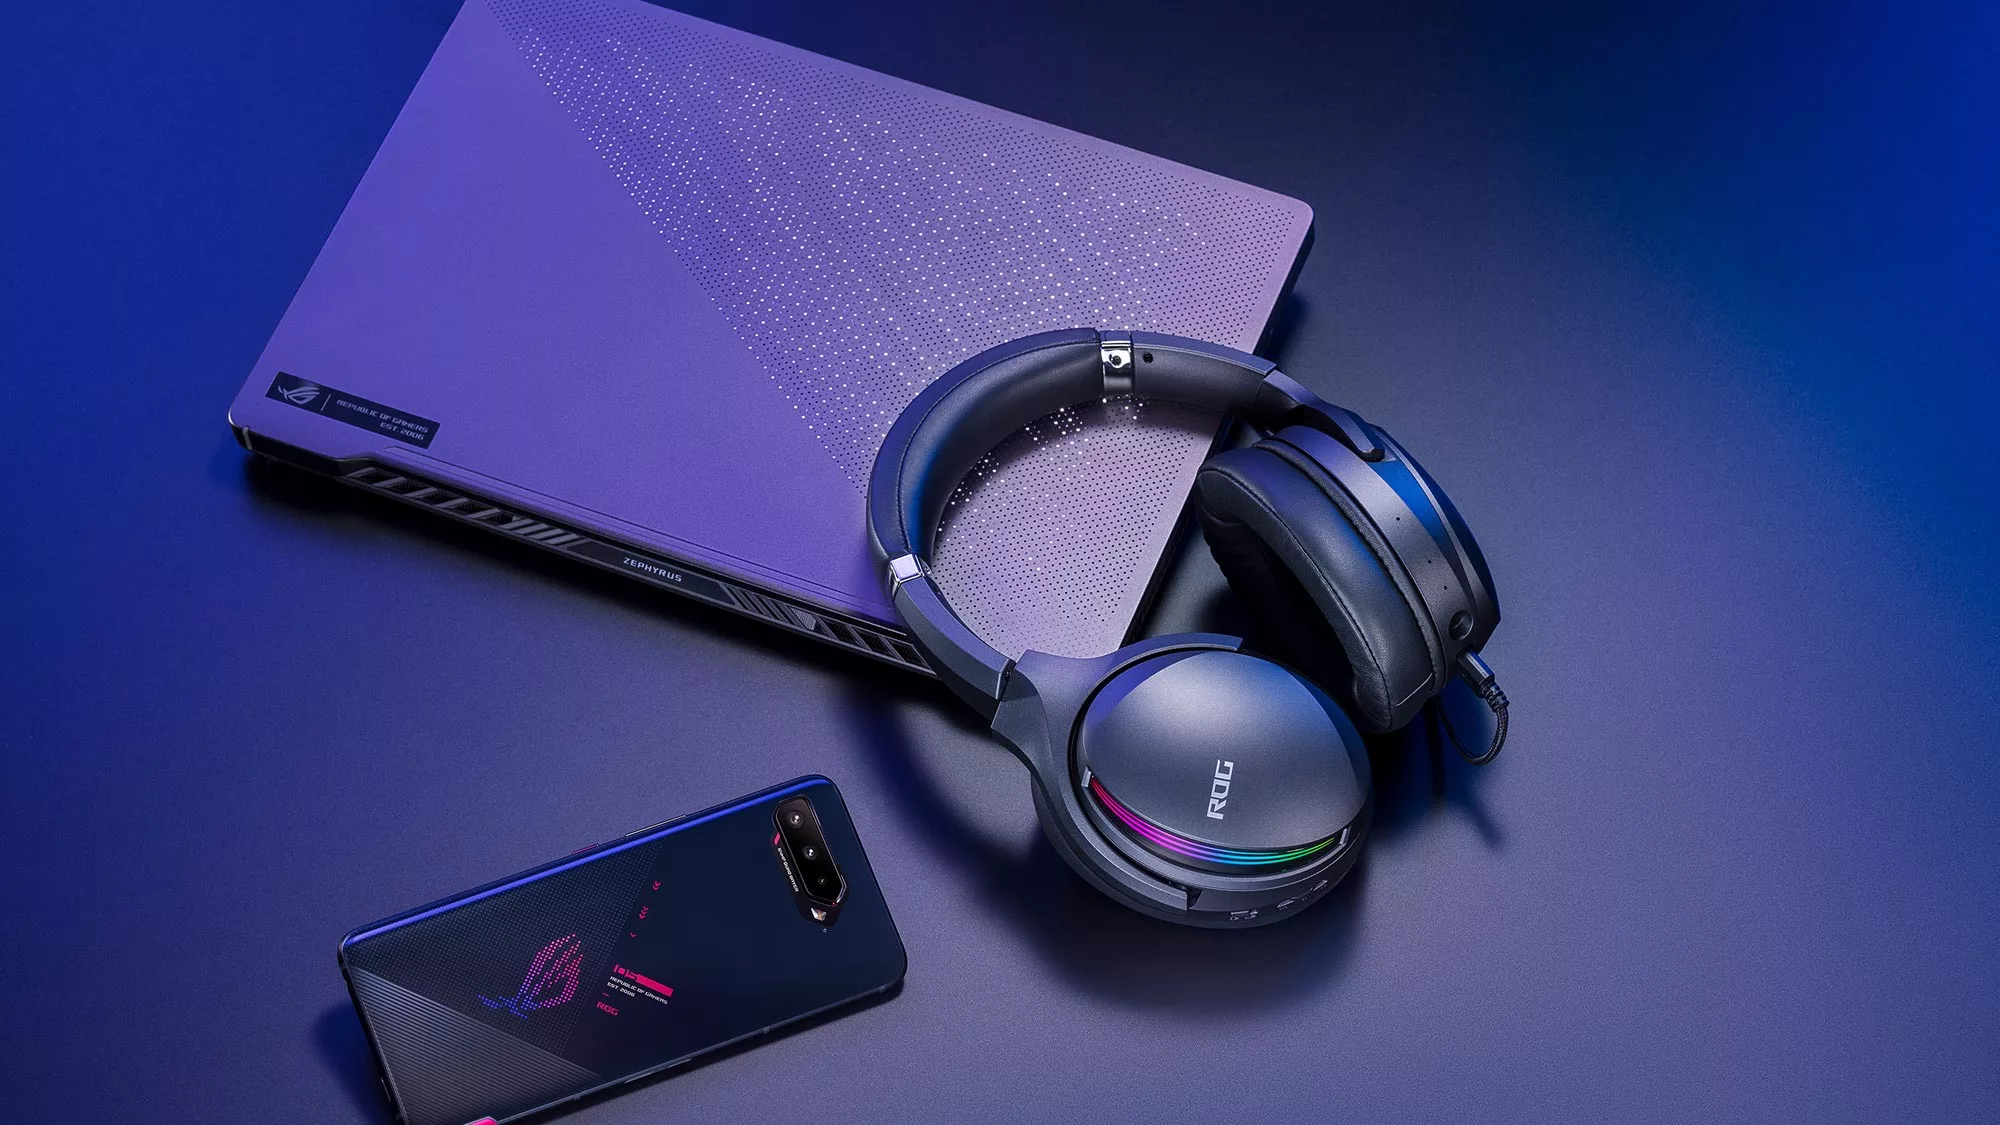 Zephyrus G14, ROG Phone 5, and an ROG Fusion II headset on a table.